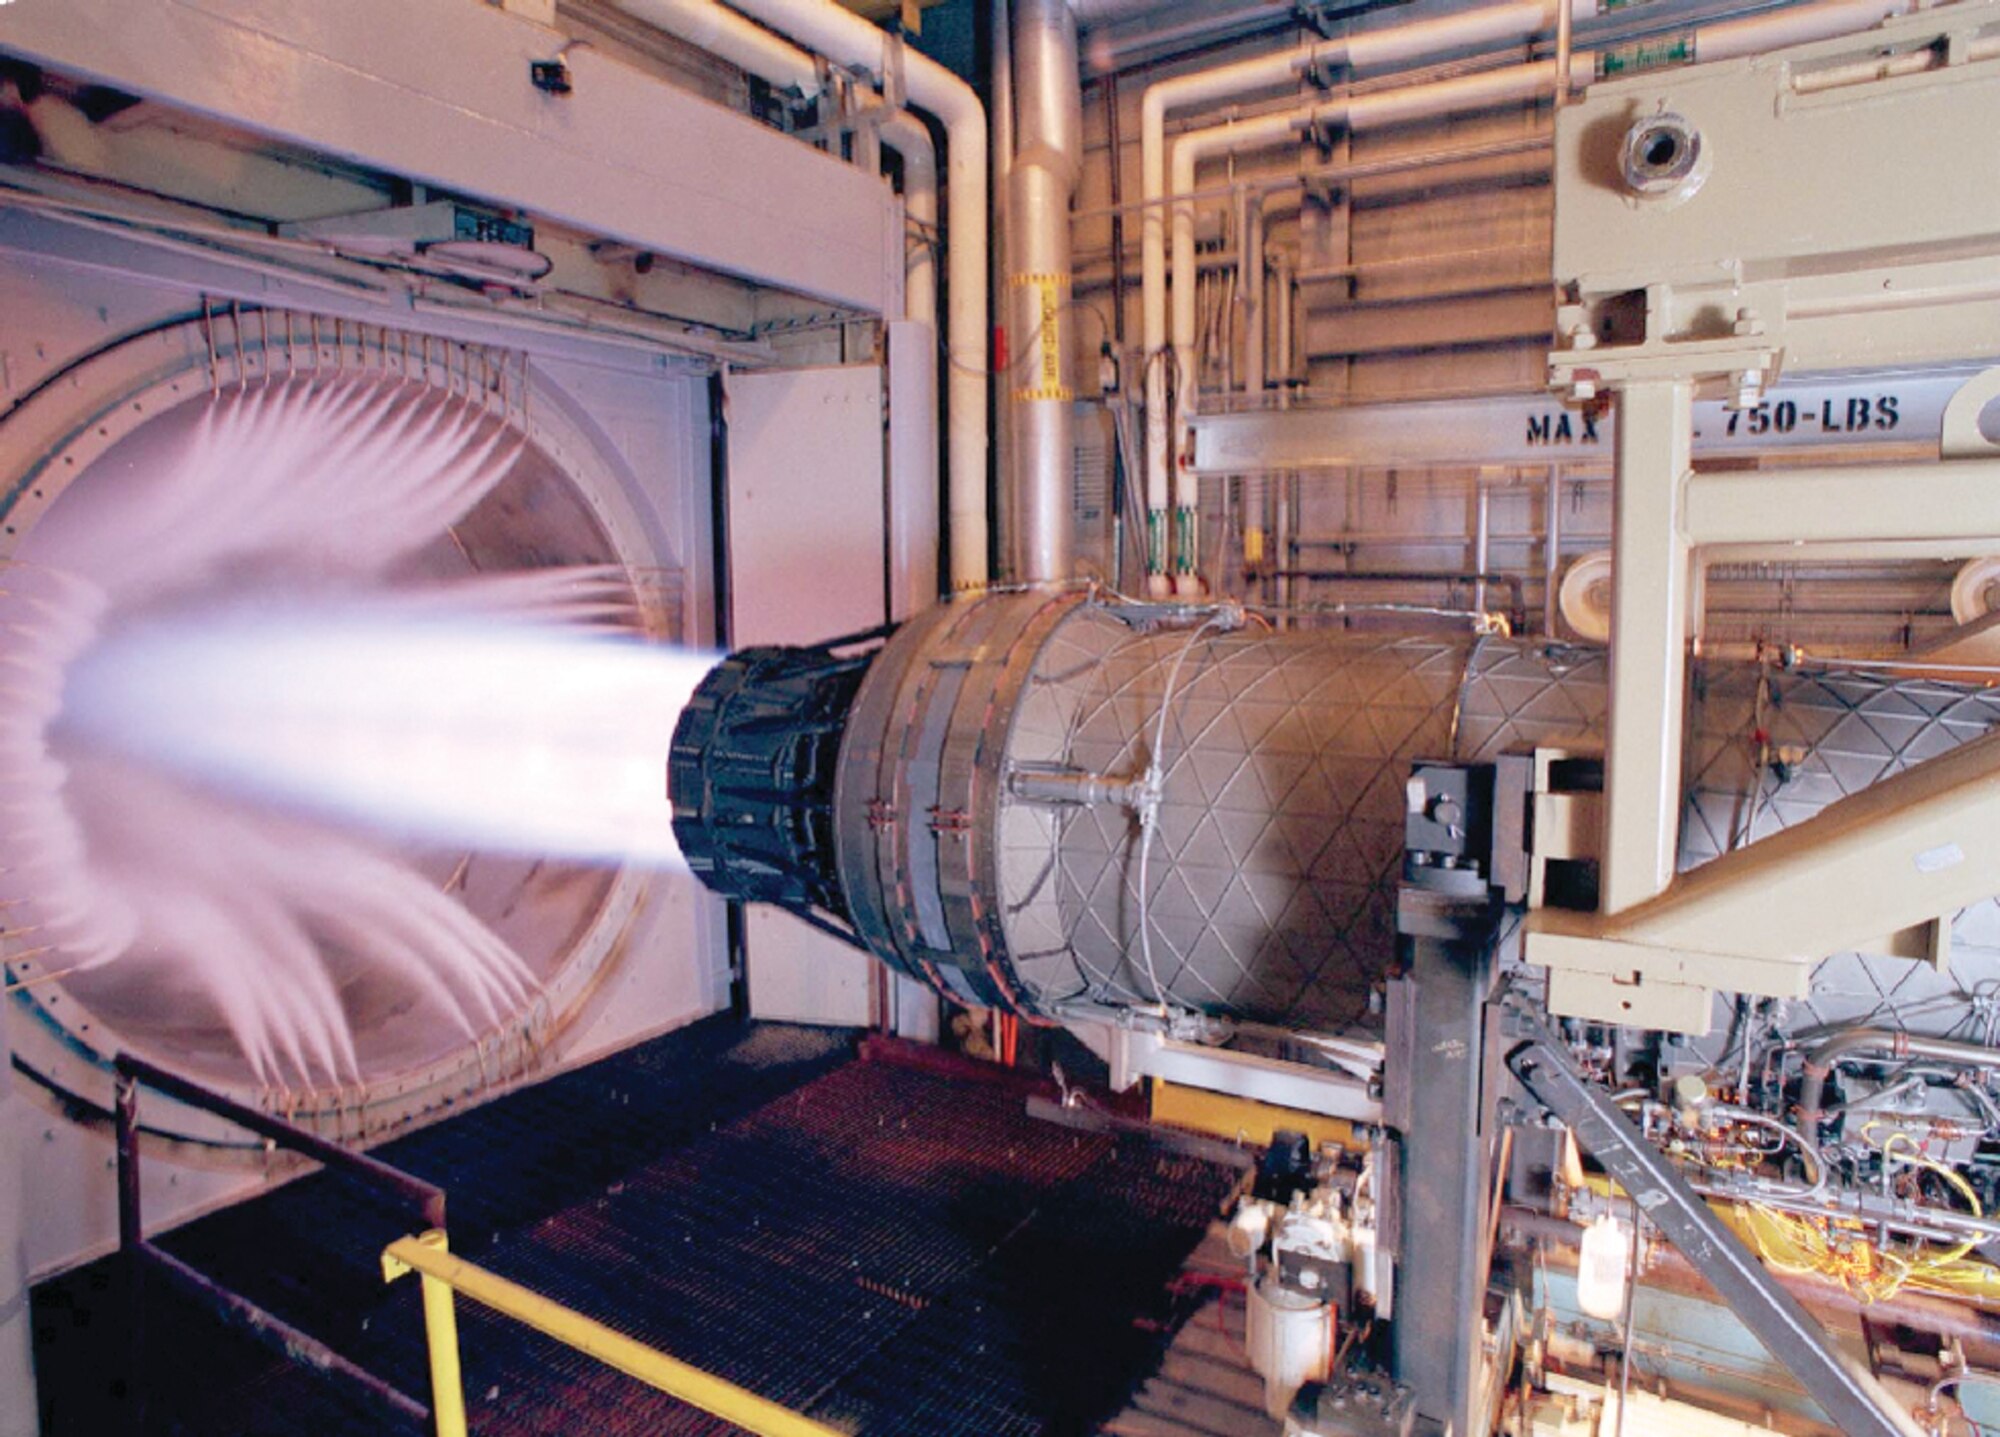 This Pratt & Whitney F100 engine, the powerplant for the F-15 Eagle and F-16 Fighting Falcon, underwent sea level testing in Arnold Engineering Development Center’s Propulsion Development Test Cell SL-2 in 2003. (AEDC photo)